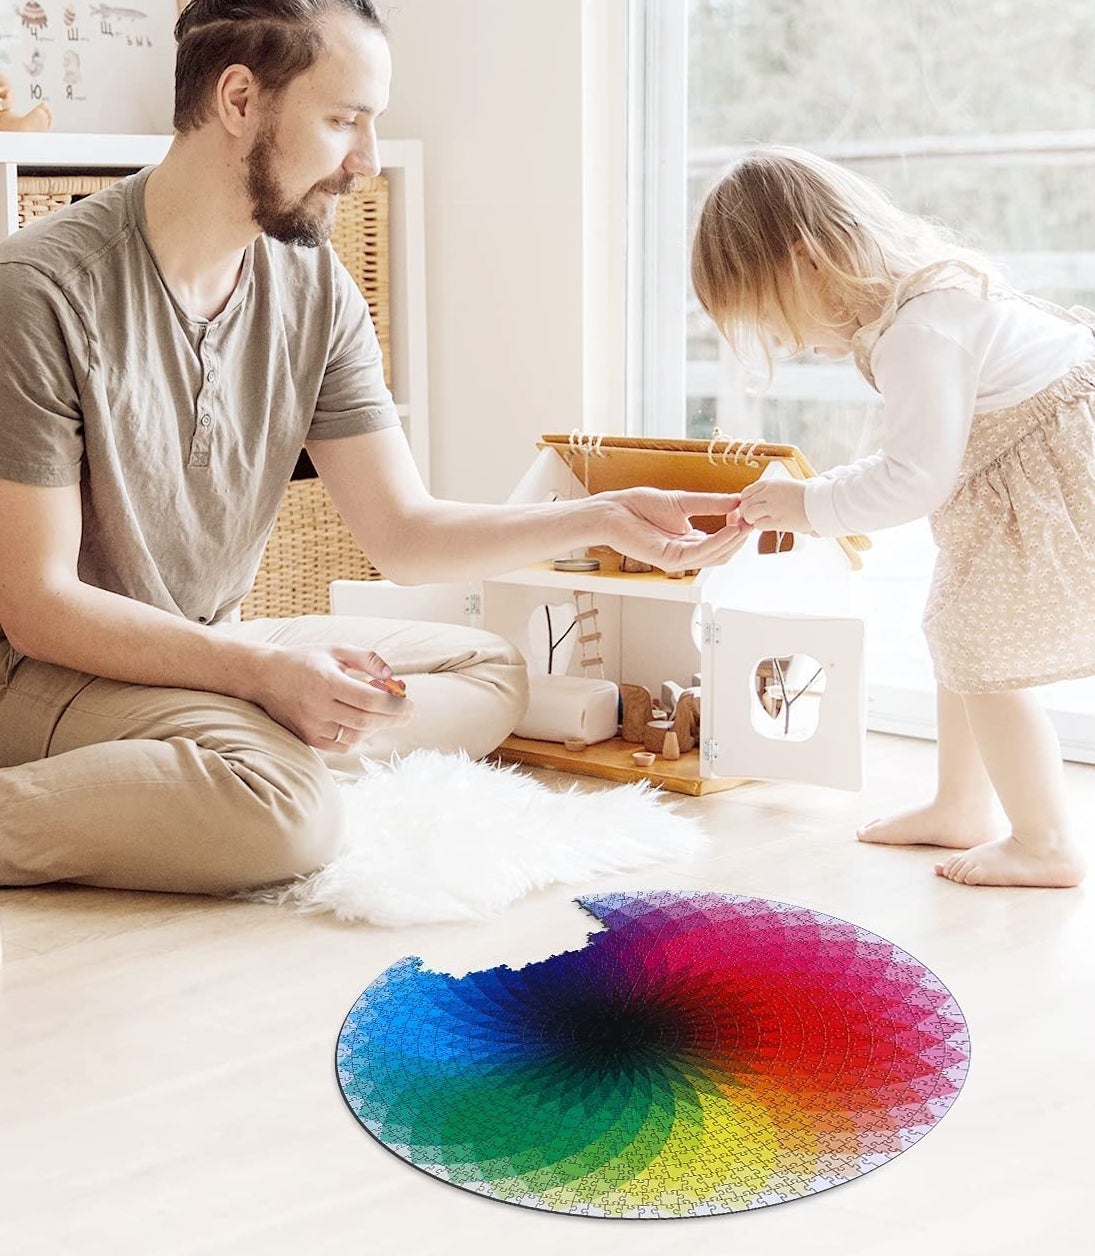 A person and child putting the puzzle together on the floor